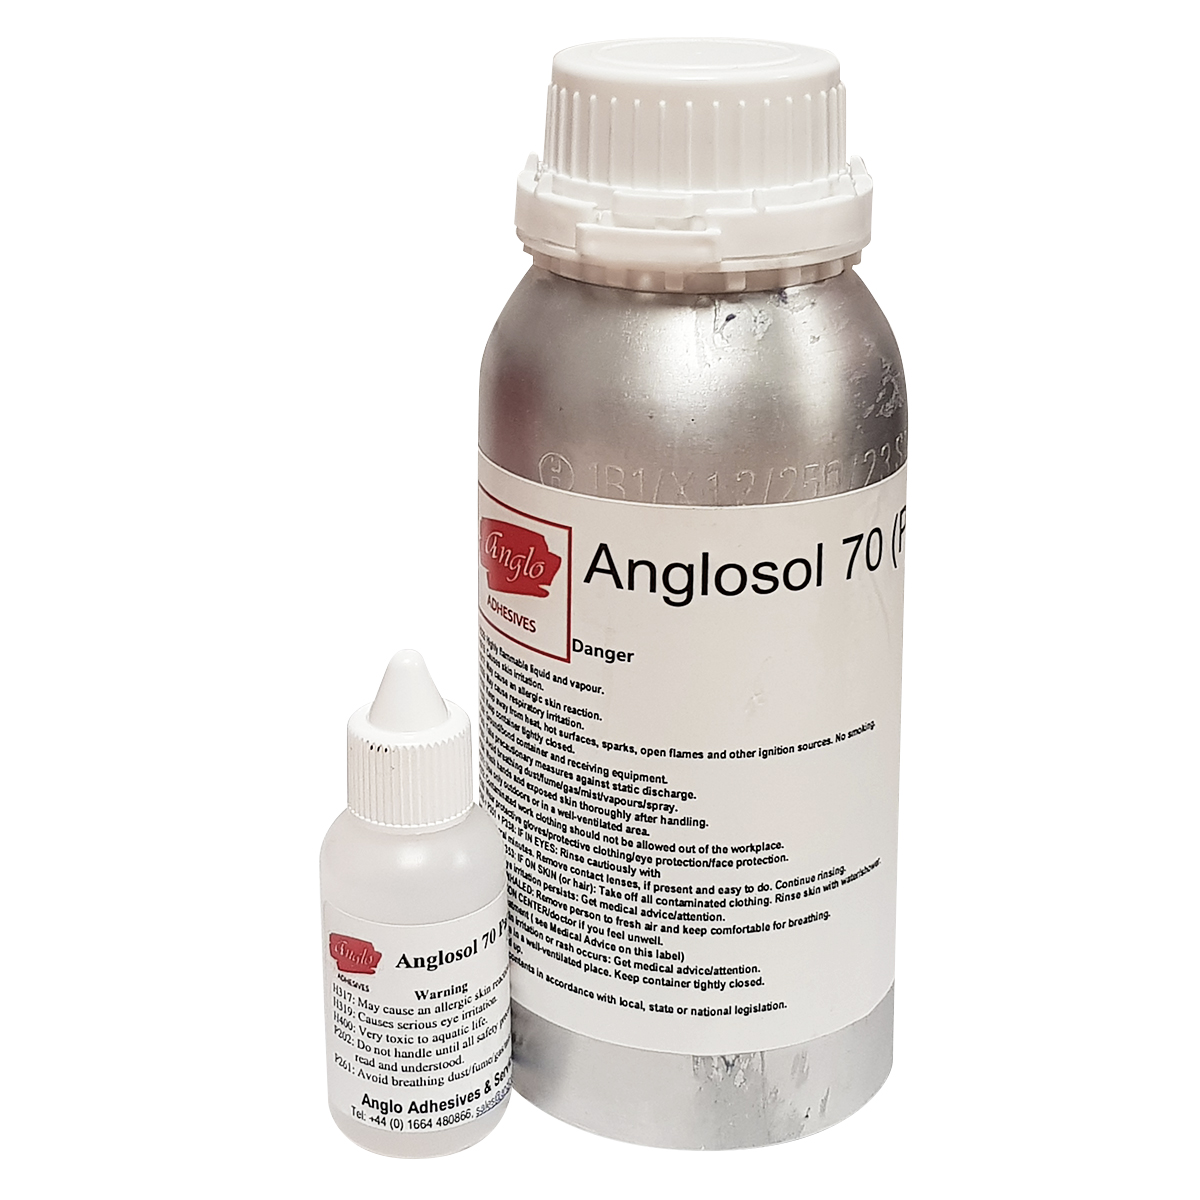 Anglosol 700 (Tensol 70 Equivalent)